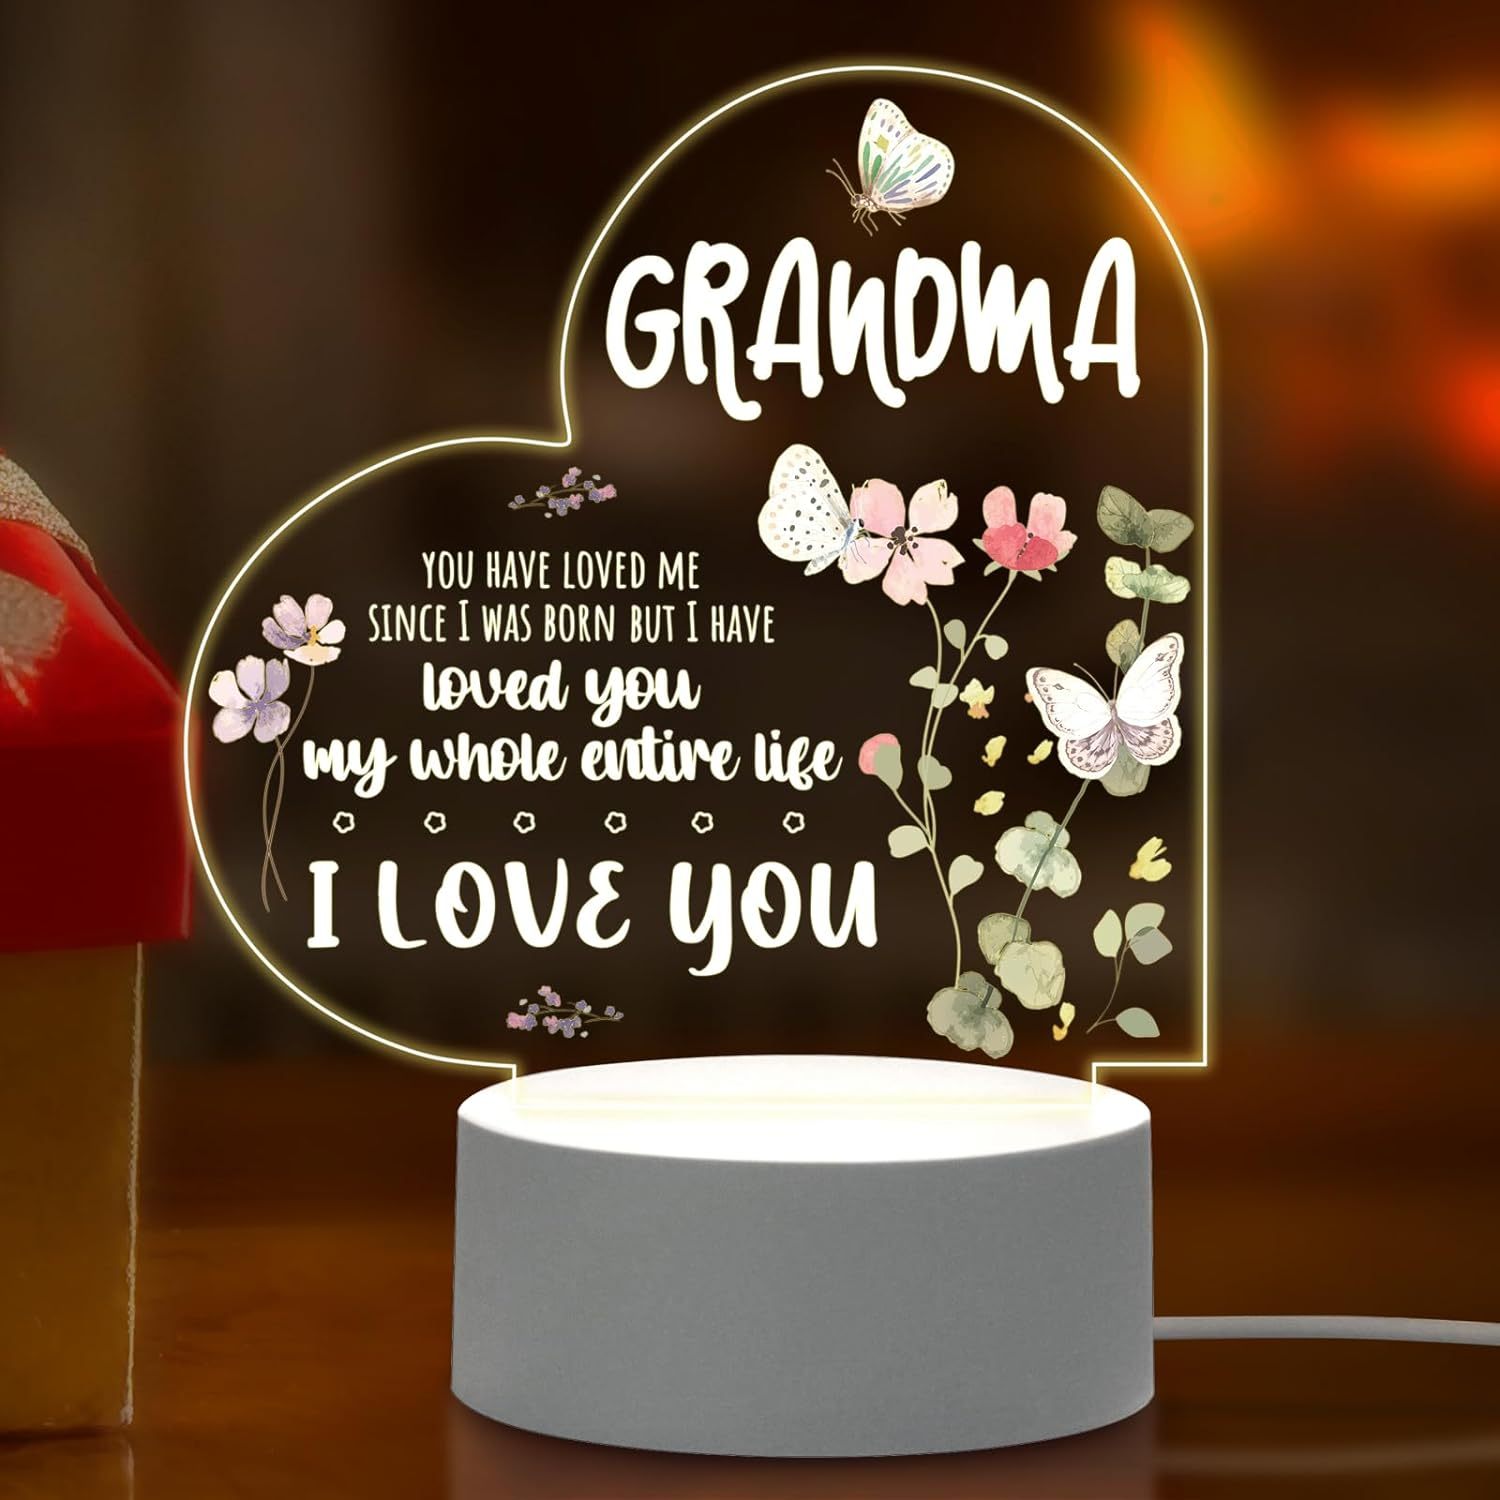 

Gifts For Grandma, Acrylic Night Light Gift For Grandma Birthday Gifts, Gifts For Grandma, Mother's Day Gifts For Grandma From Granddaughter